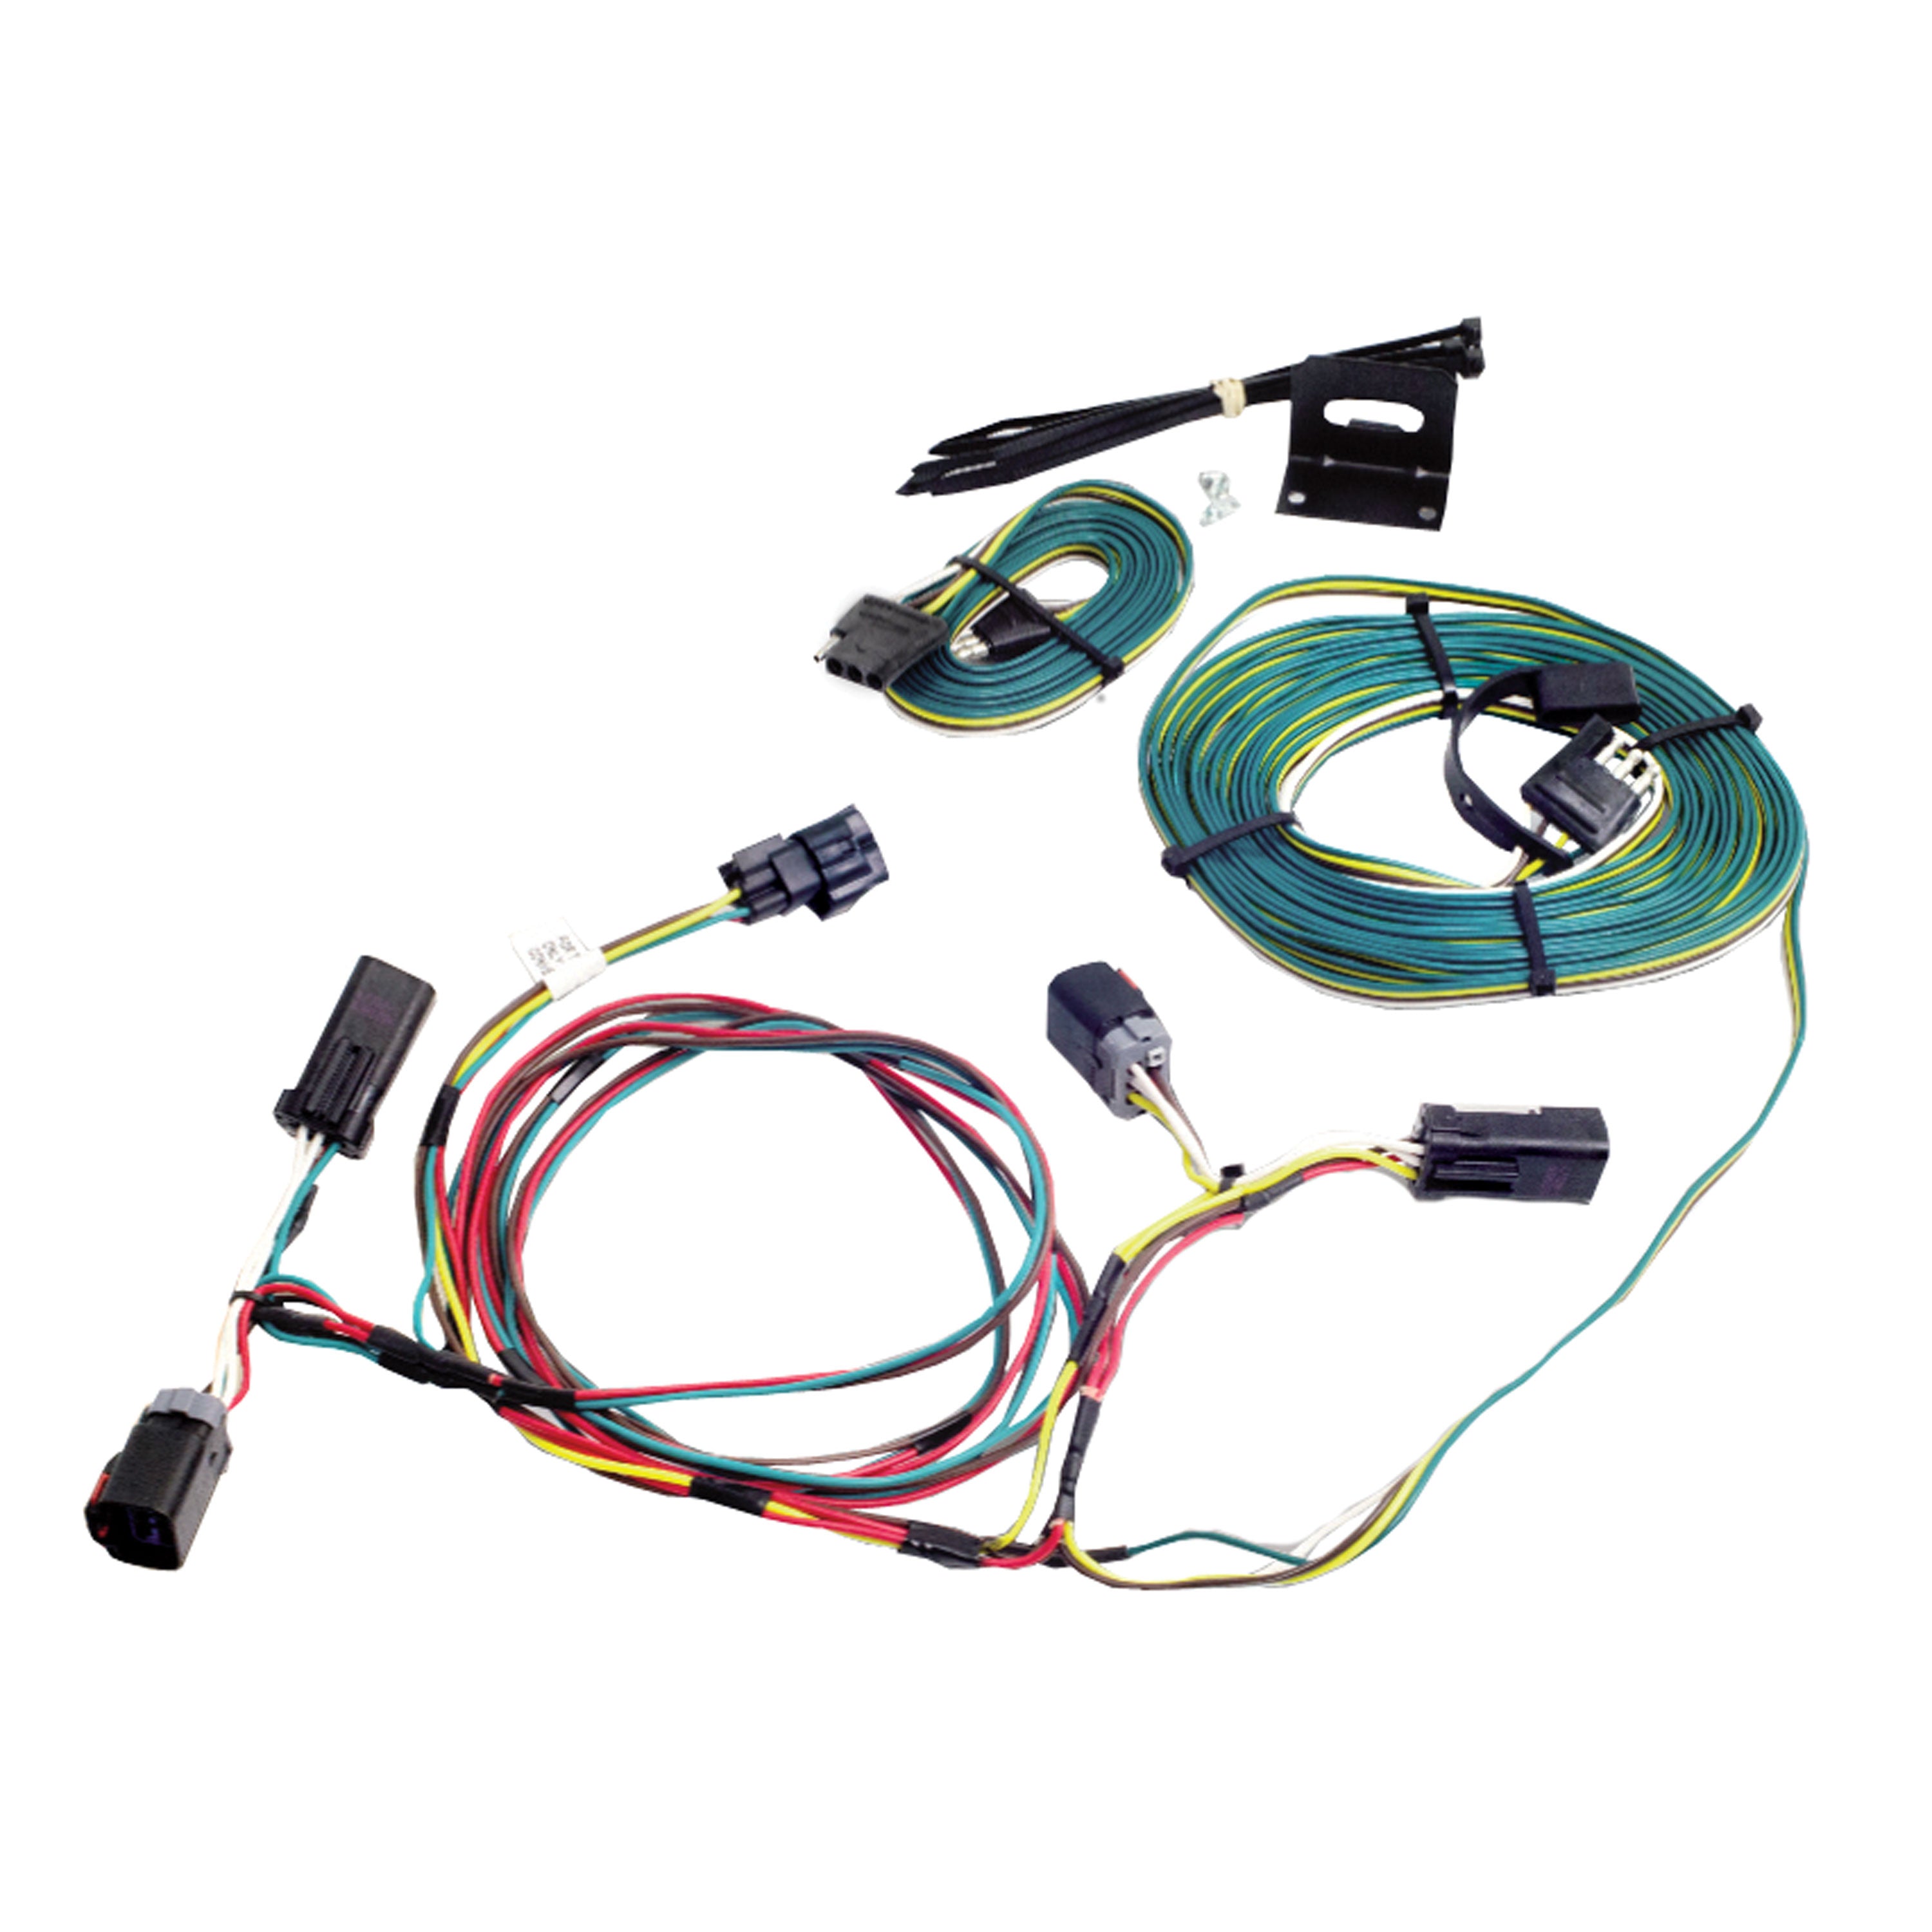 Demco 9523079 Towed Connector Vehicle Wiring Kit - For Dodge Ram 1500 '09-'14